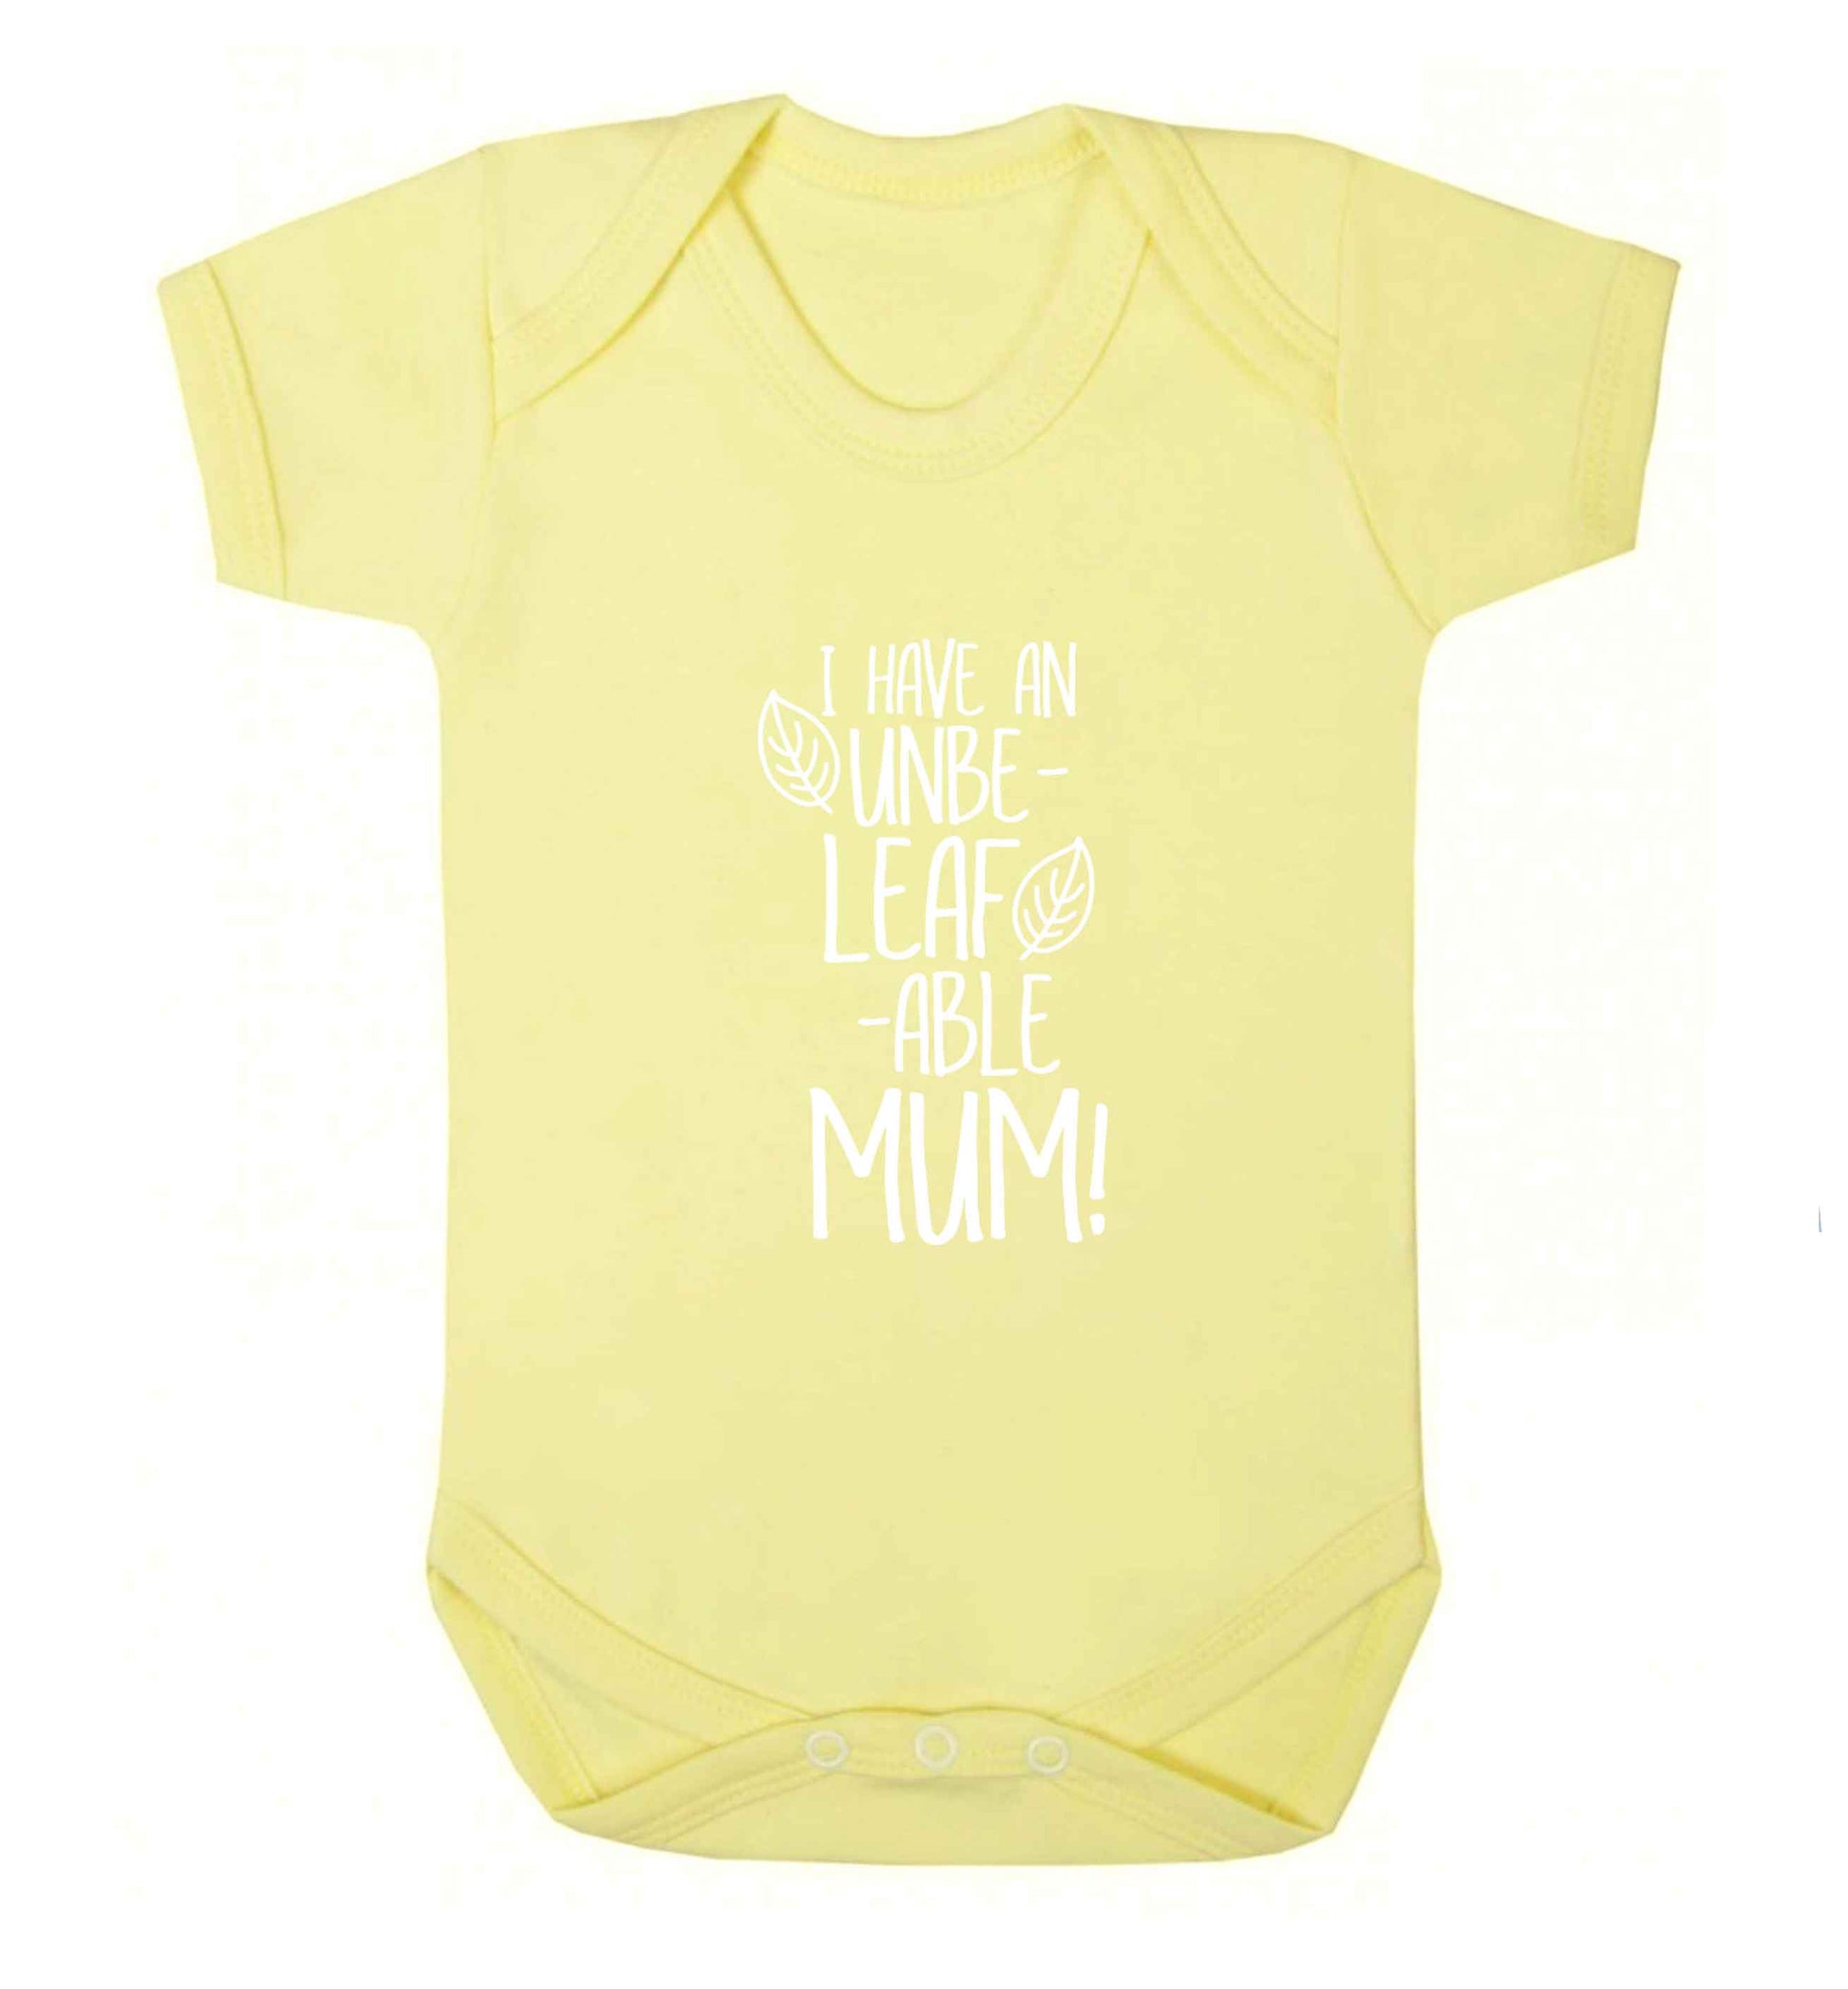 I have an unbeleafable mum! baby vest pale yellow 18-24 months